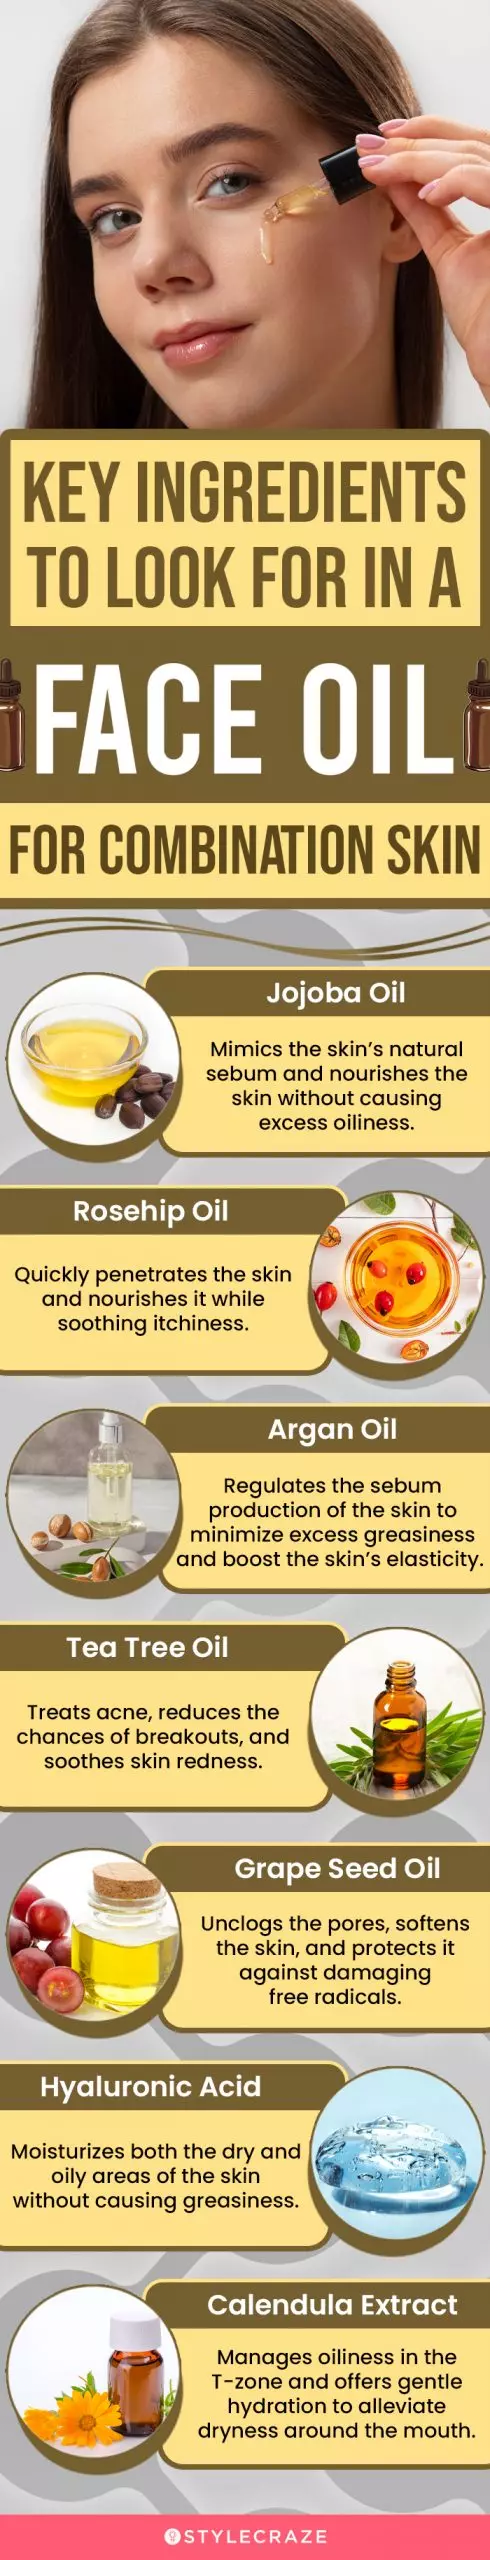 Key Ingredients To Look For In A Face Oil For Combination Skin (infographic)